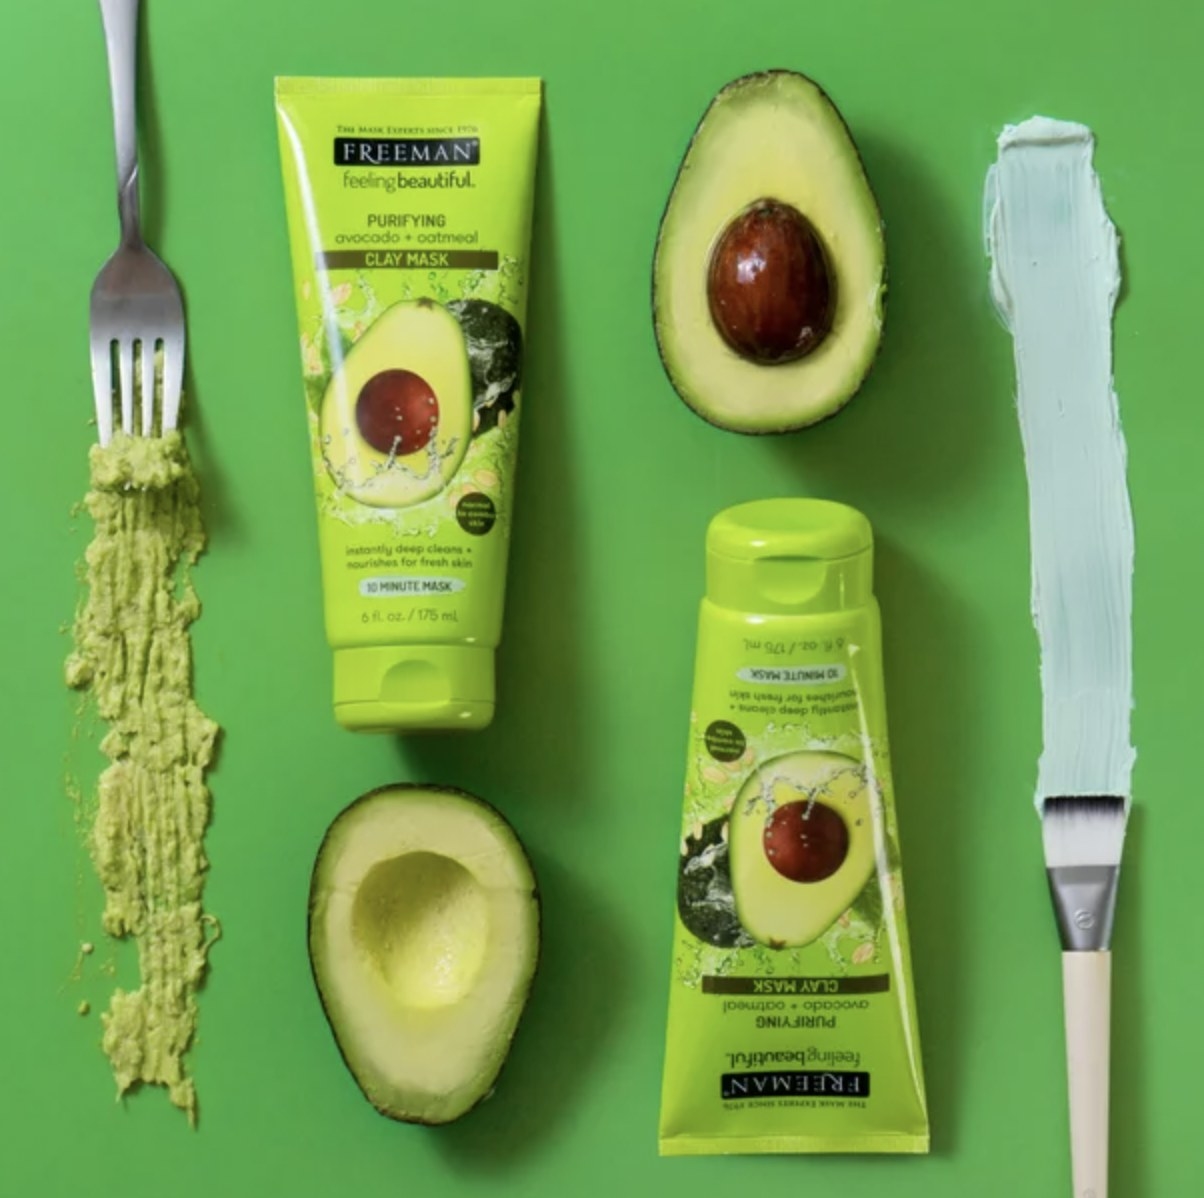 A set of two mask tubes with cut avocados and swatches